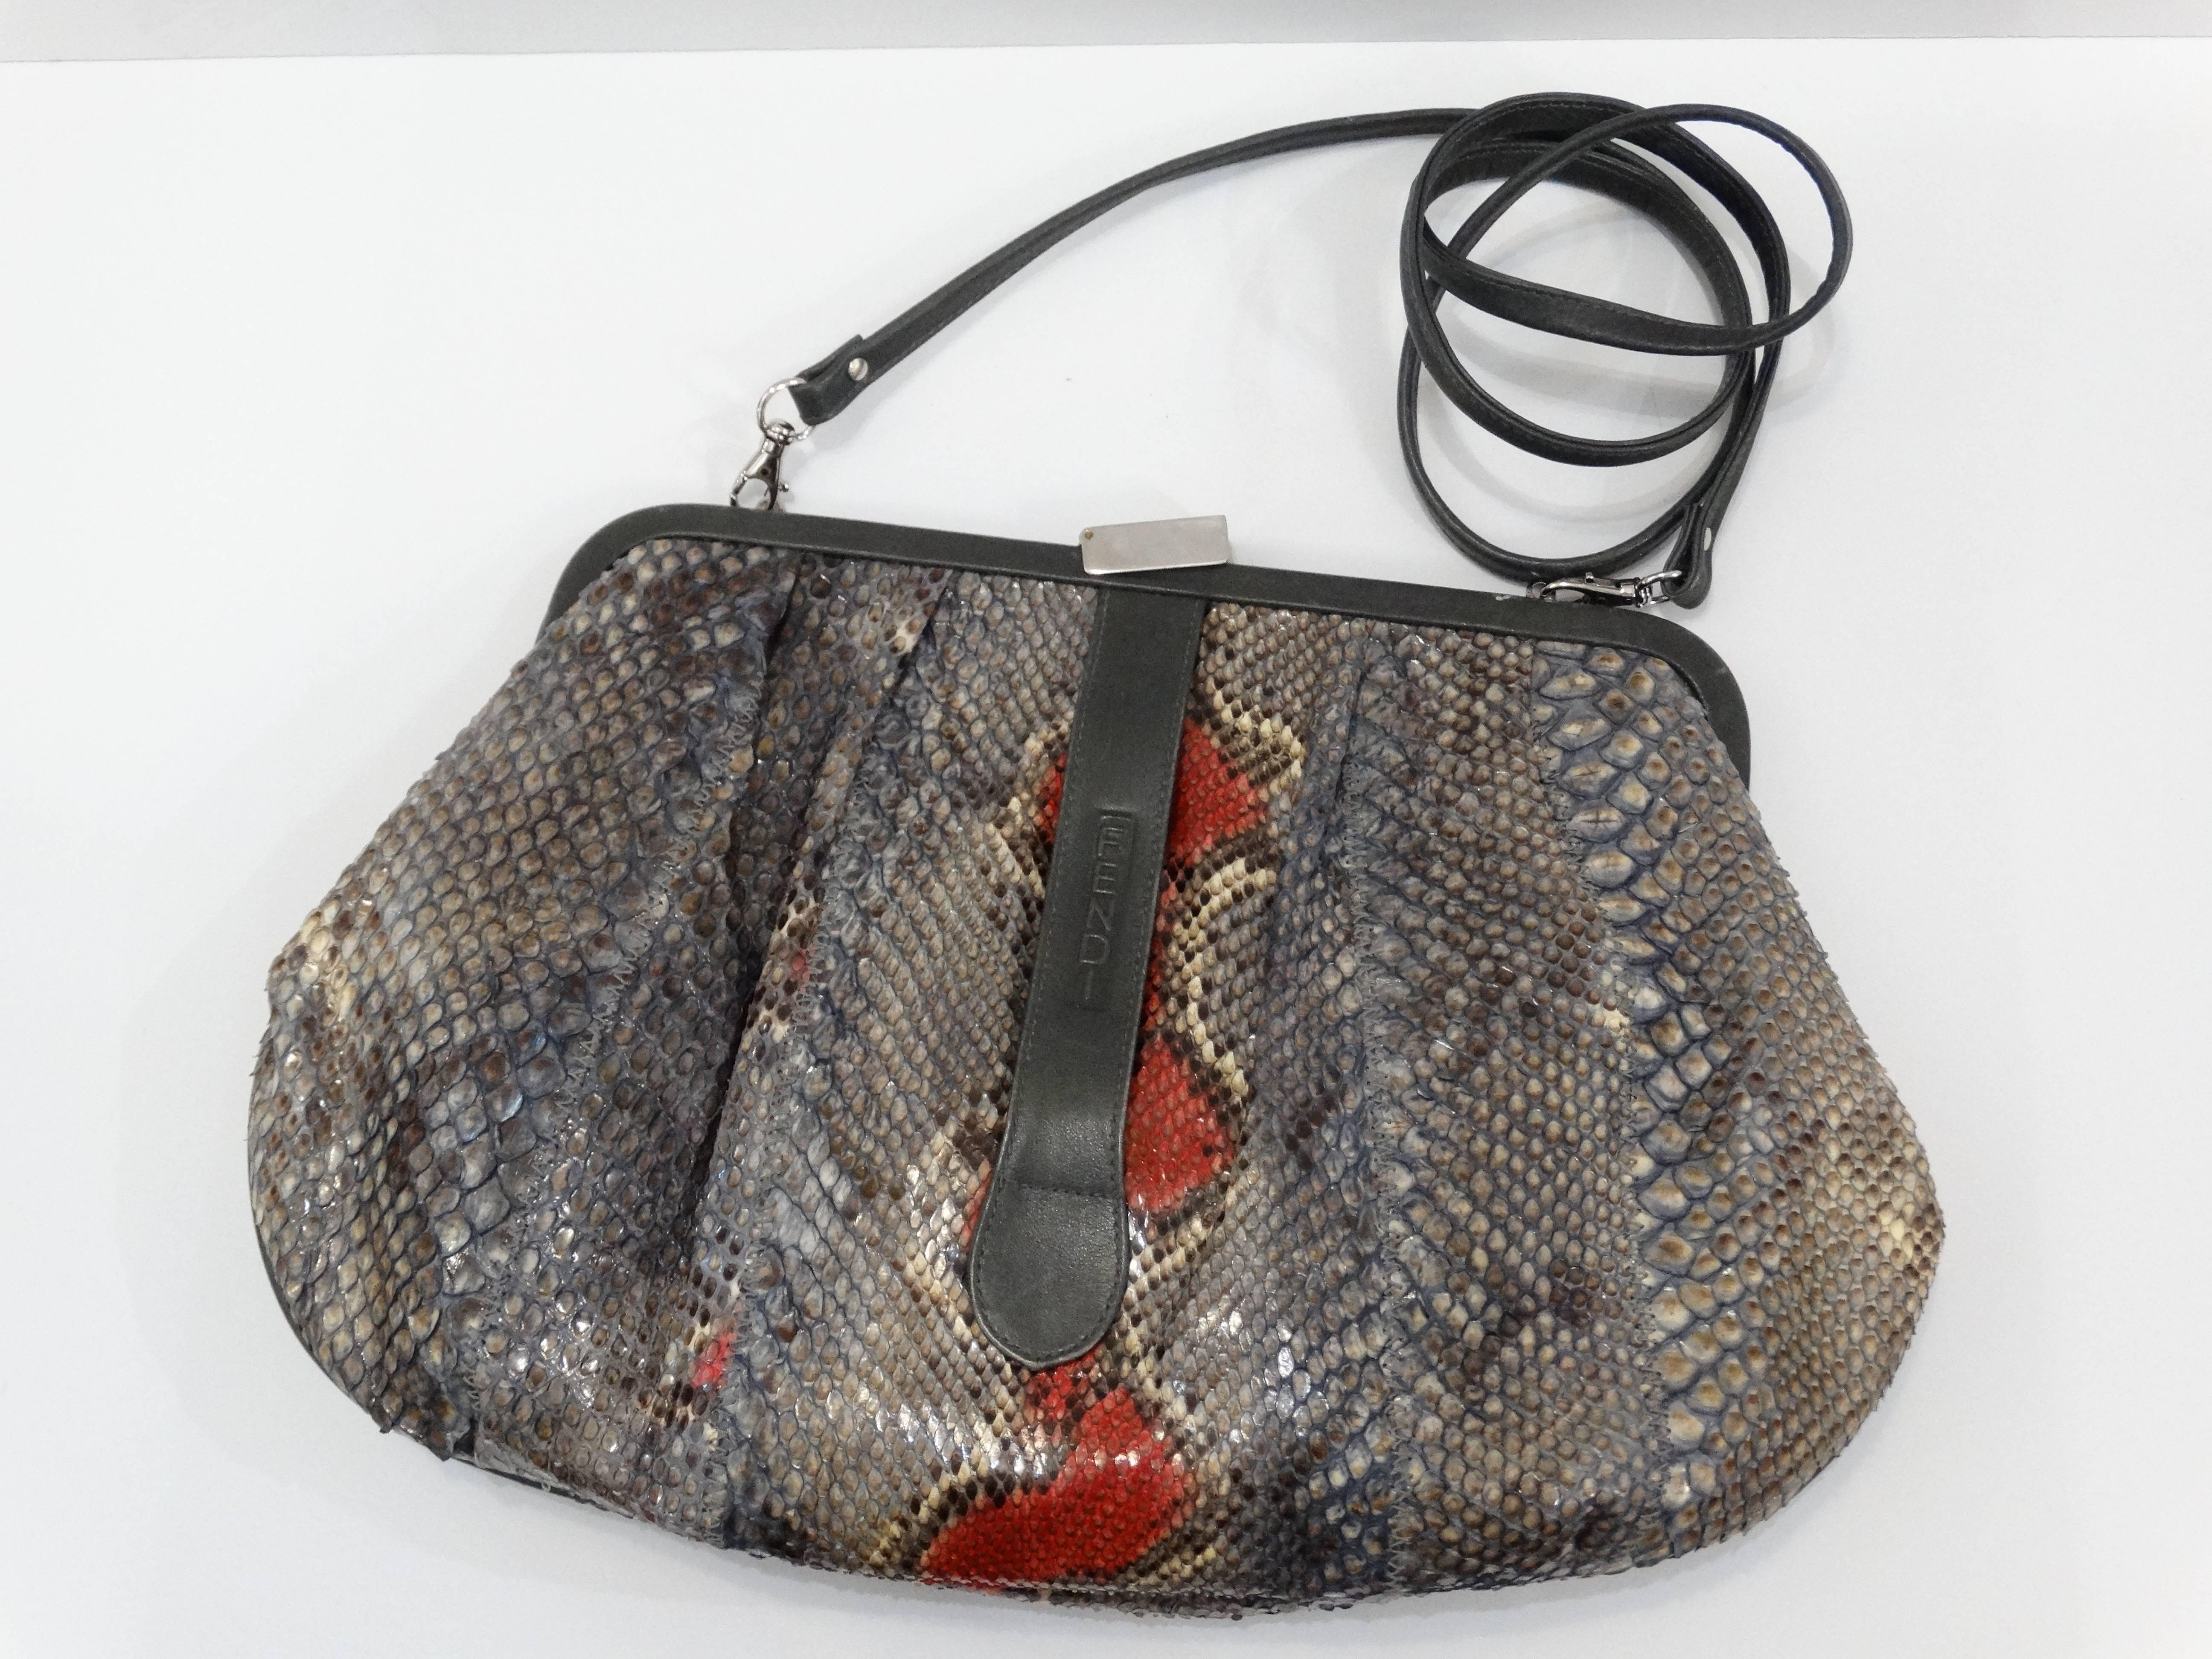 Incredible 1980s Fendi snakeskin clutch handbag in grey and red with grey leather accents. Fully lined interior with zip pocket. Tuck in the long strap to wear as a clutch or wear as crossbody.  Top frame secured with a silver clasp, minor wear on